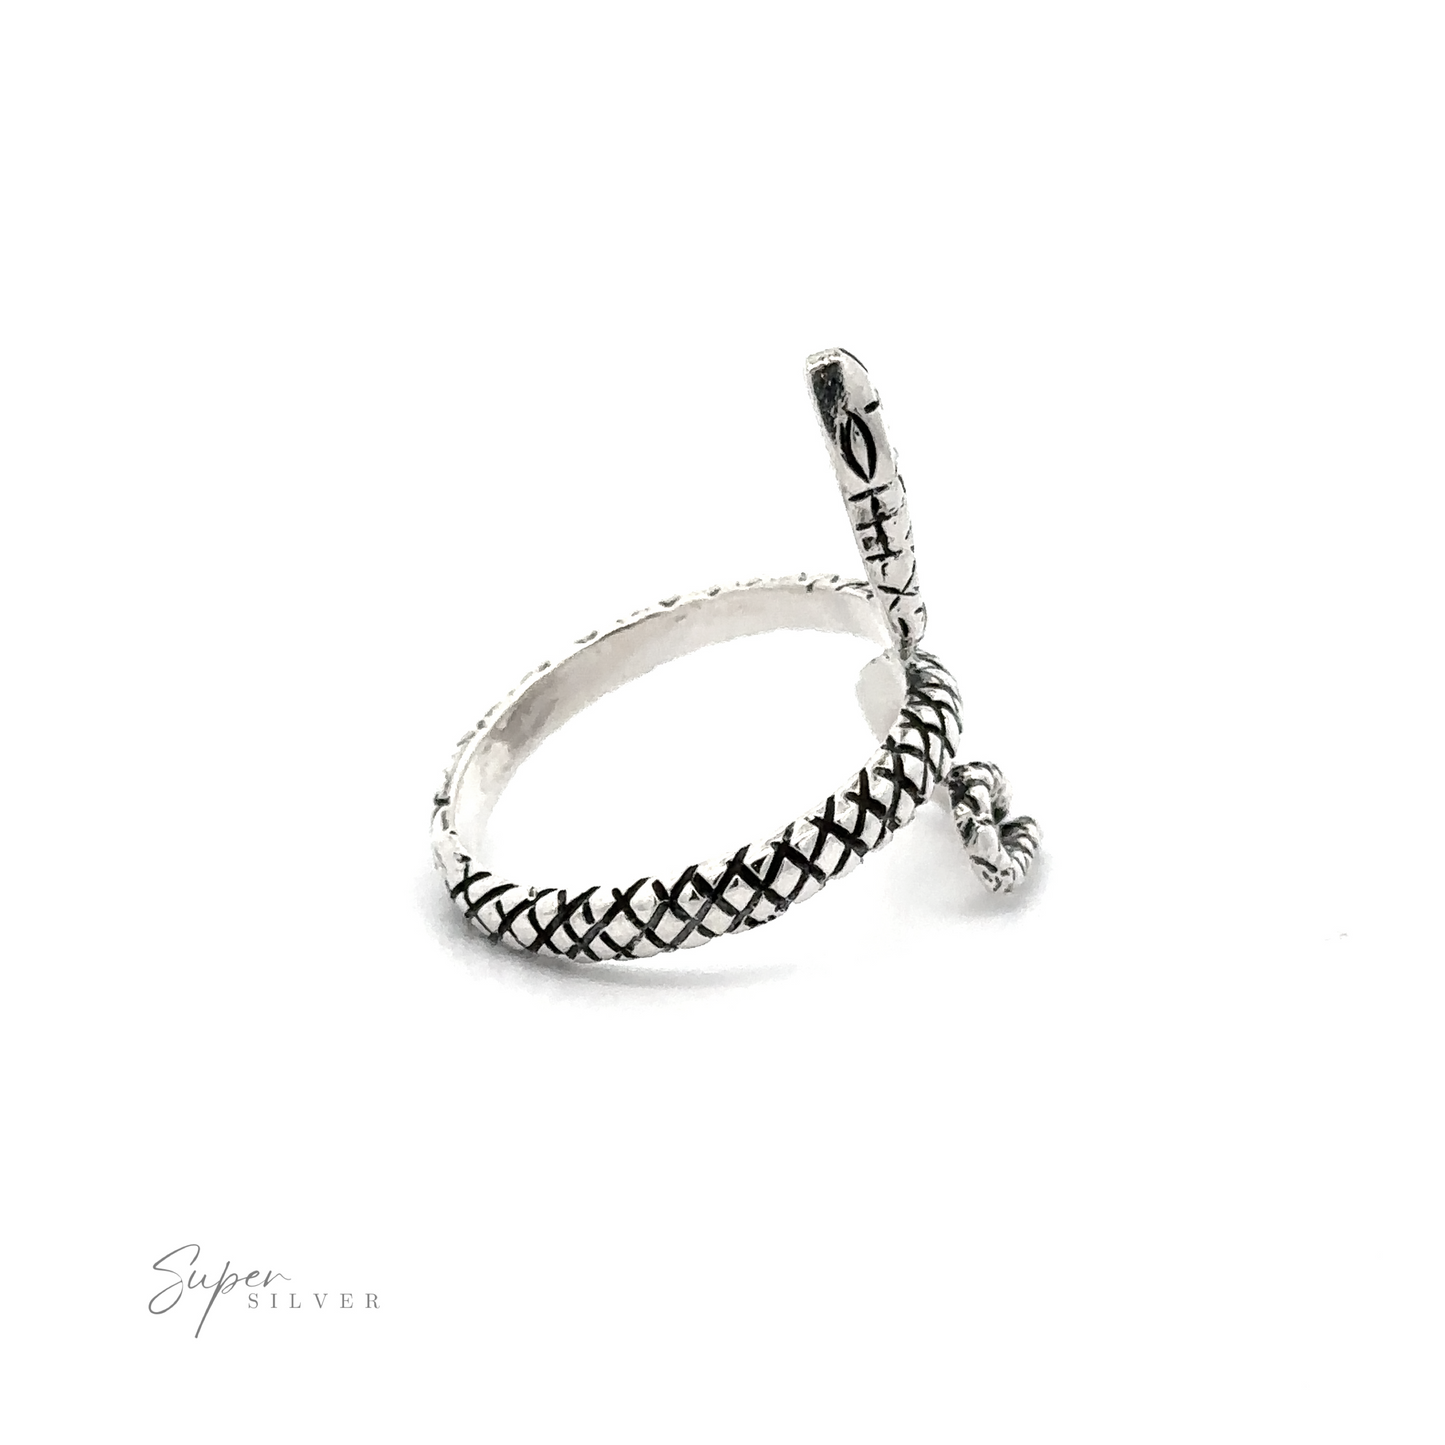 Textured Winding Snake Ring with a loop detail, placed on a white background with the text "sterling silver.